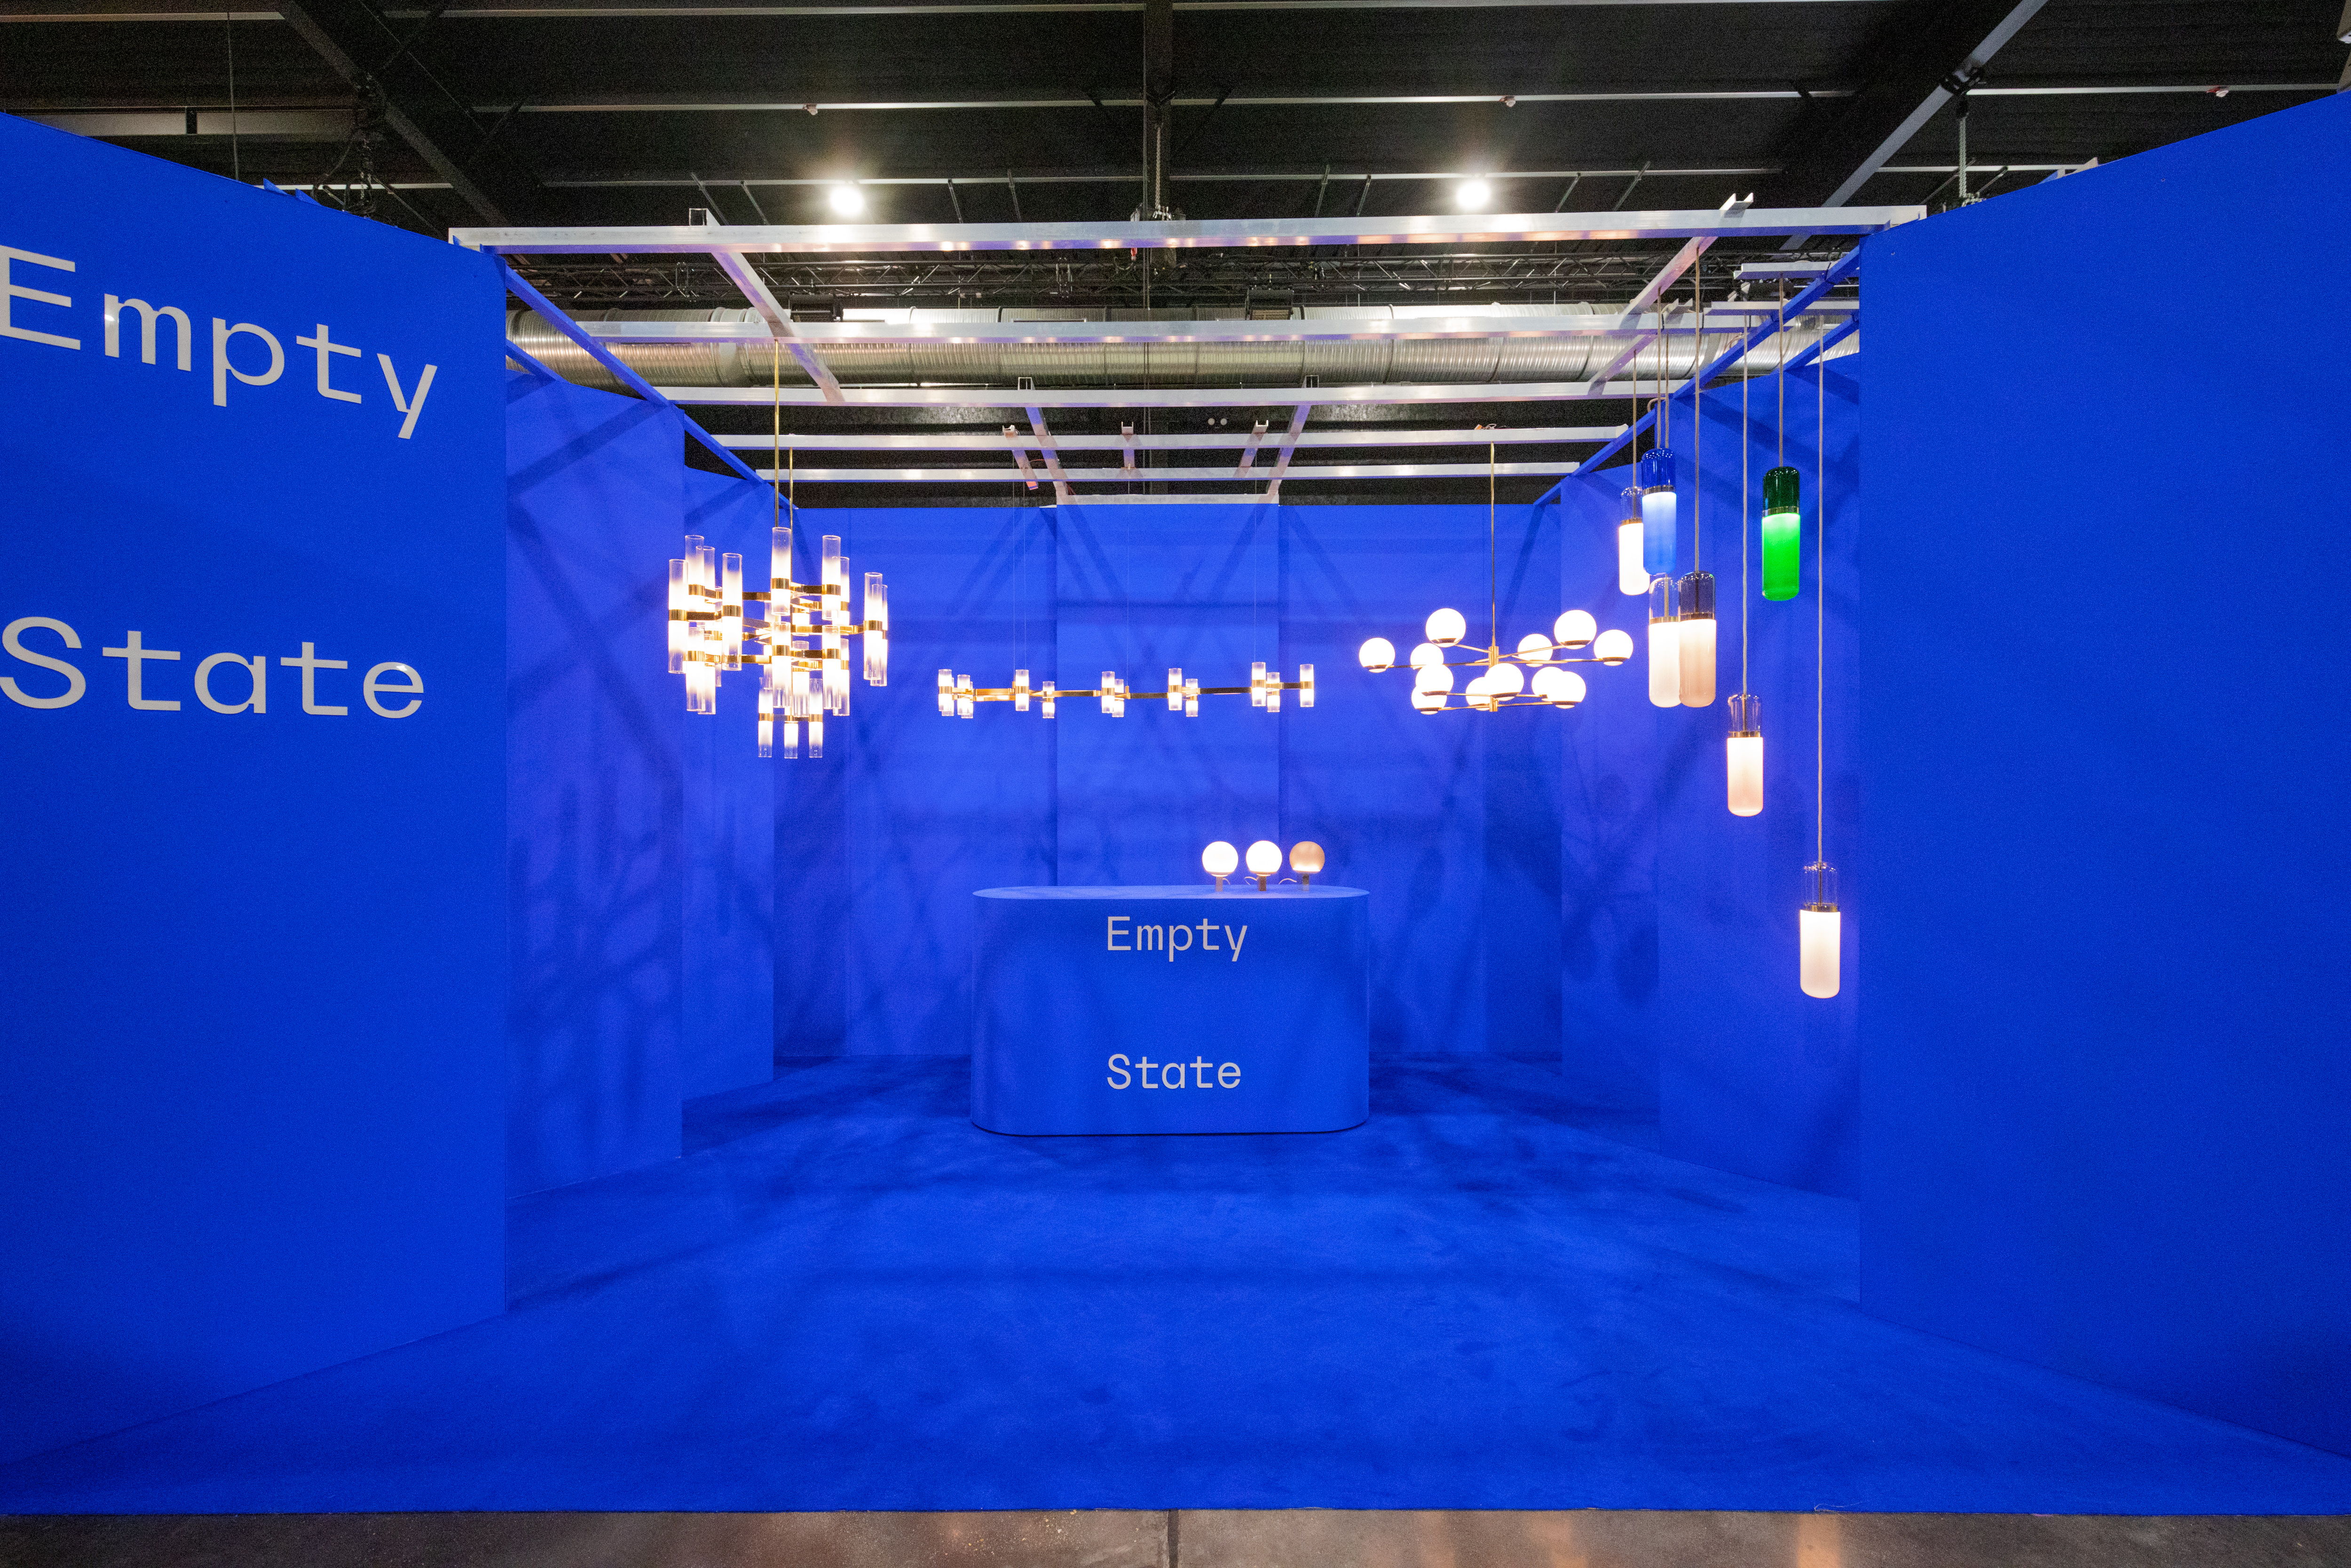 Design London Exhibition Imagery – Empty State stand – Image Credit Sam Frost Photos